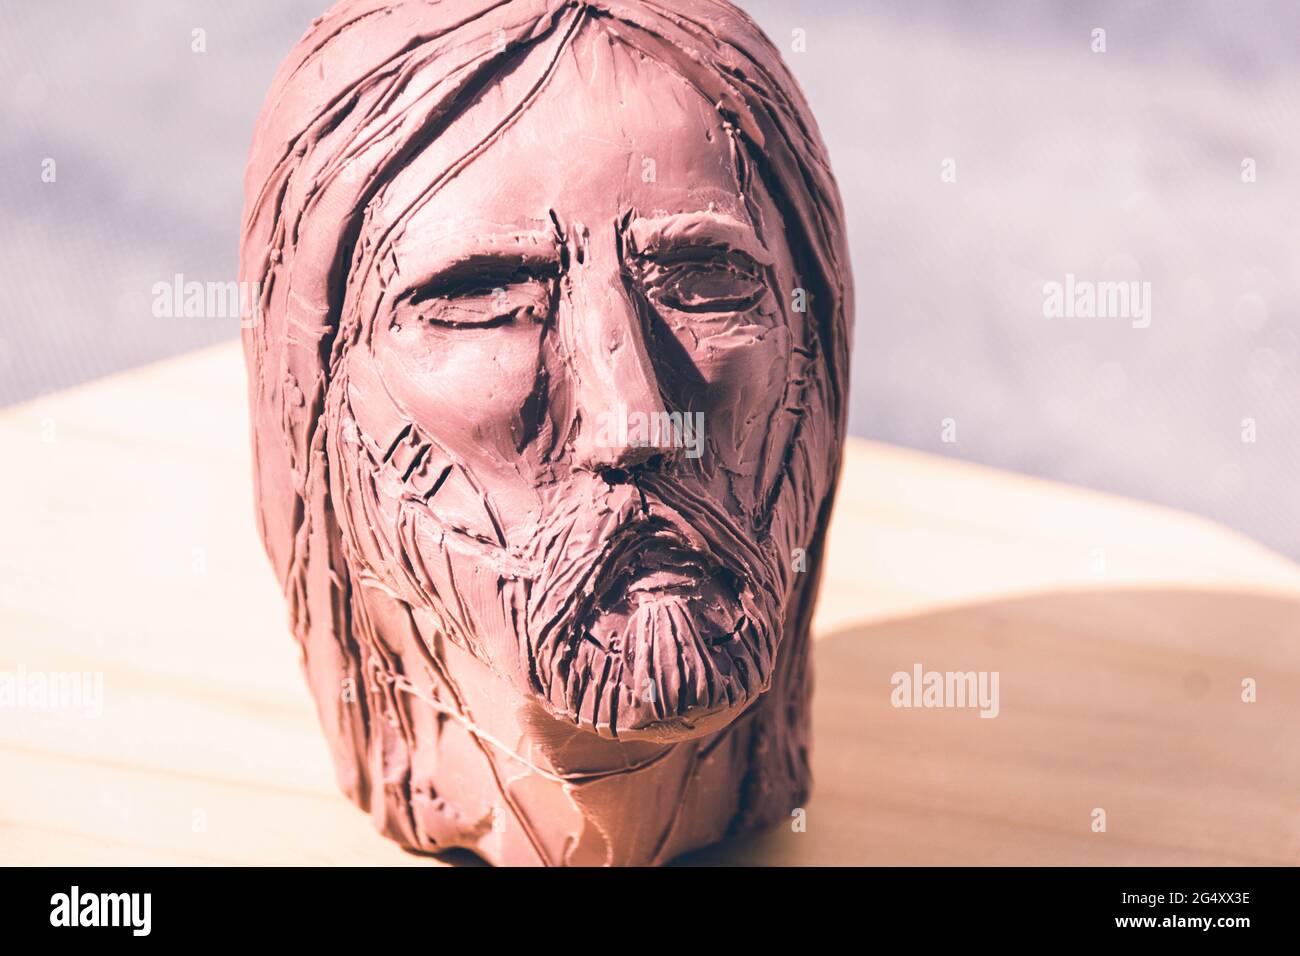 Photograph of Jesus Christ face clay sculpture Stock Photo